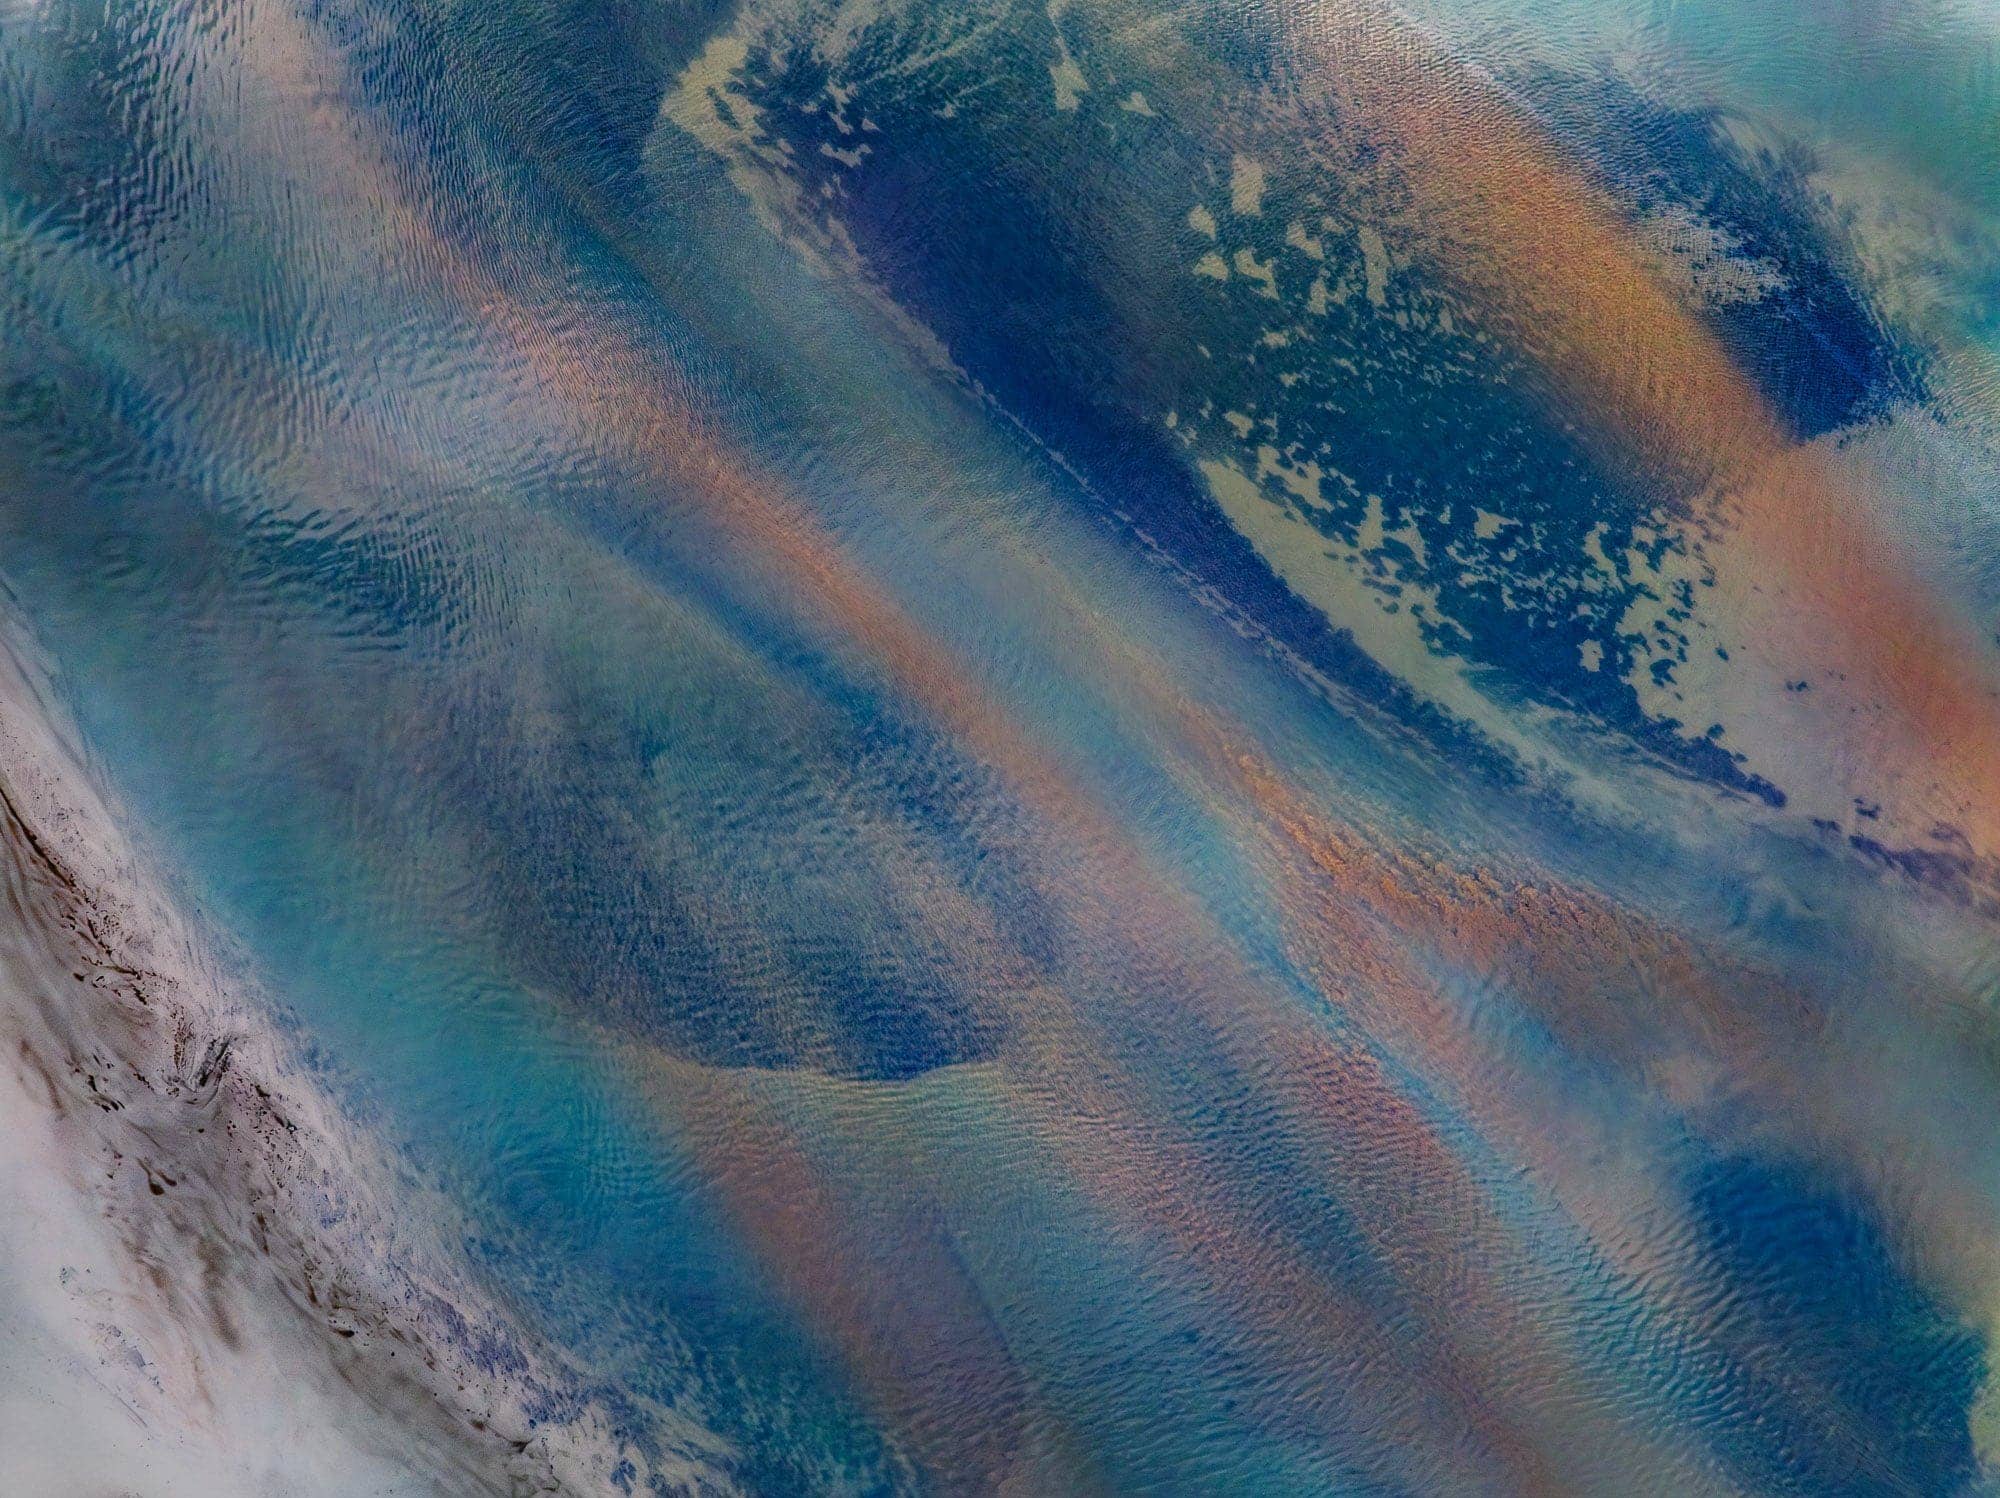 Aerial photo of Fjord di Papós, Iceland, with intricate patterns and a spectrum of colors resembling an abstract watercolor painting.